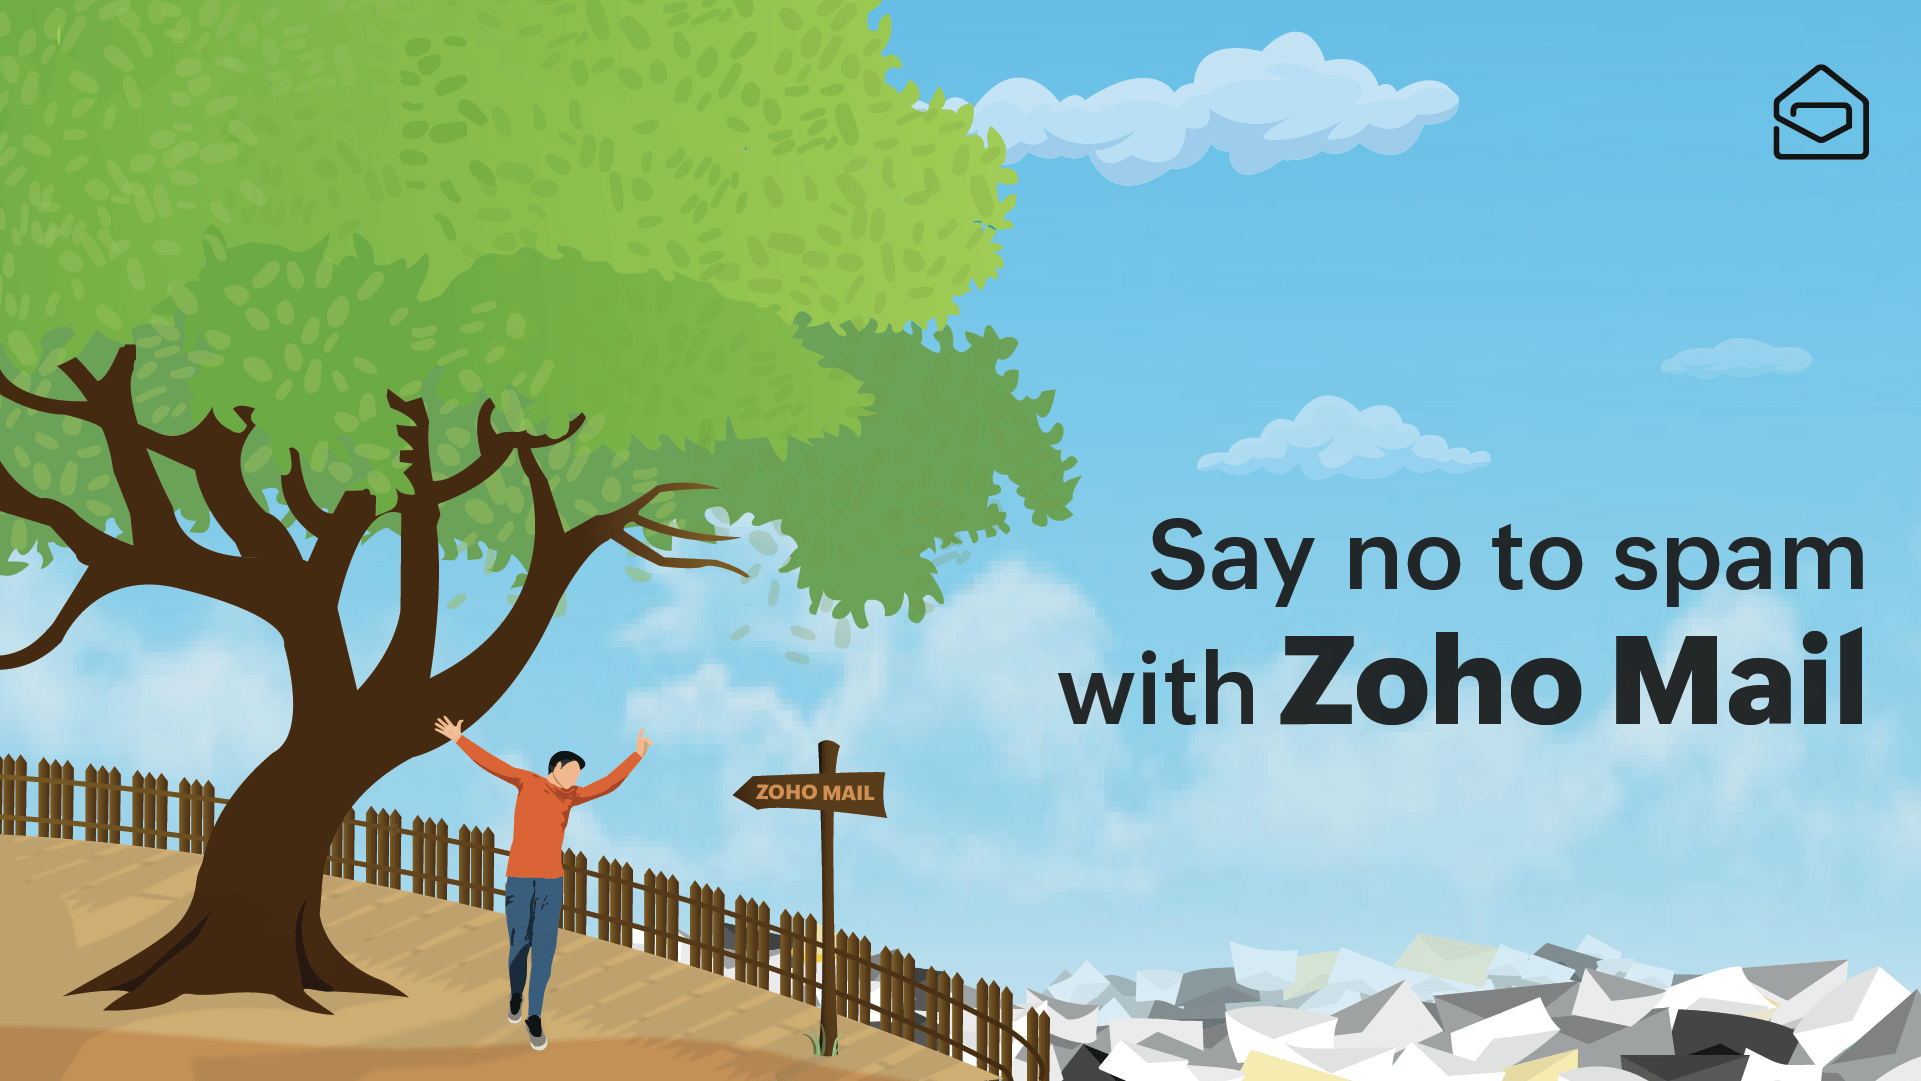 Zoho mail spam protection